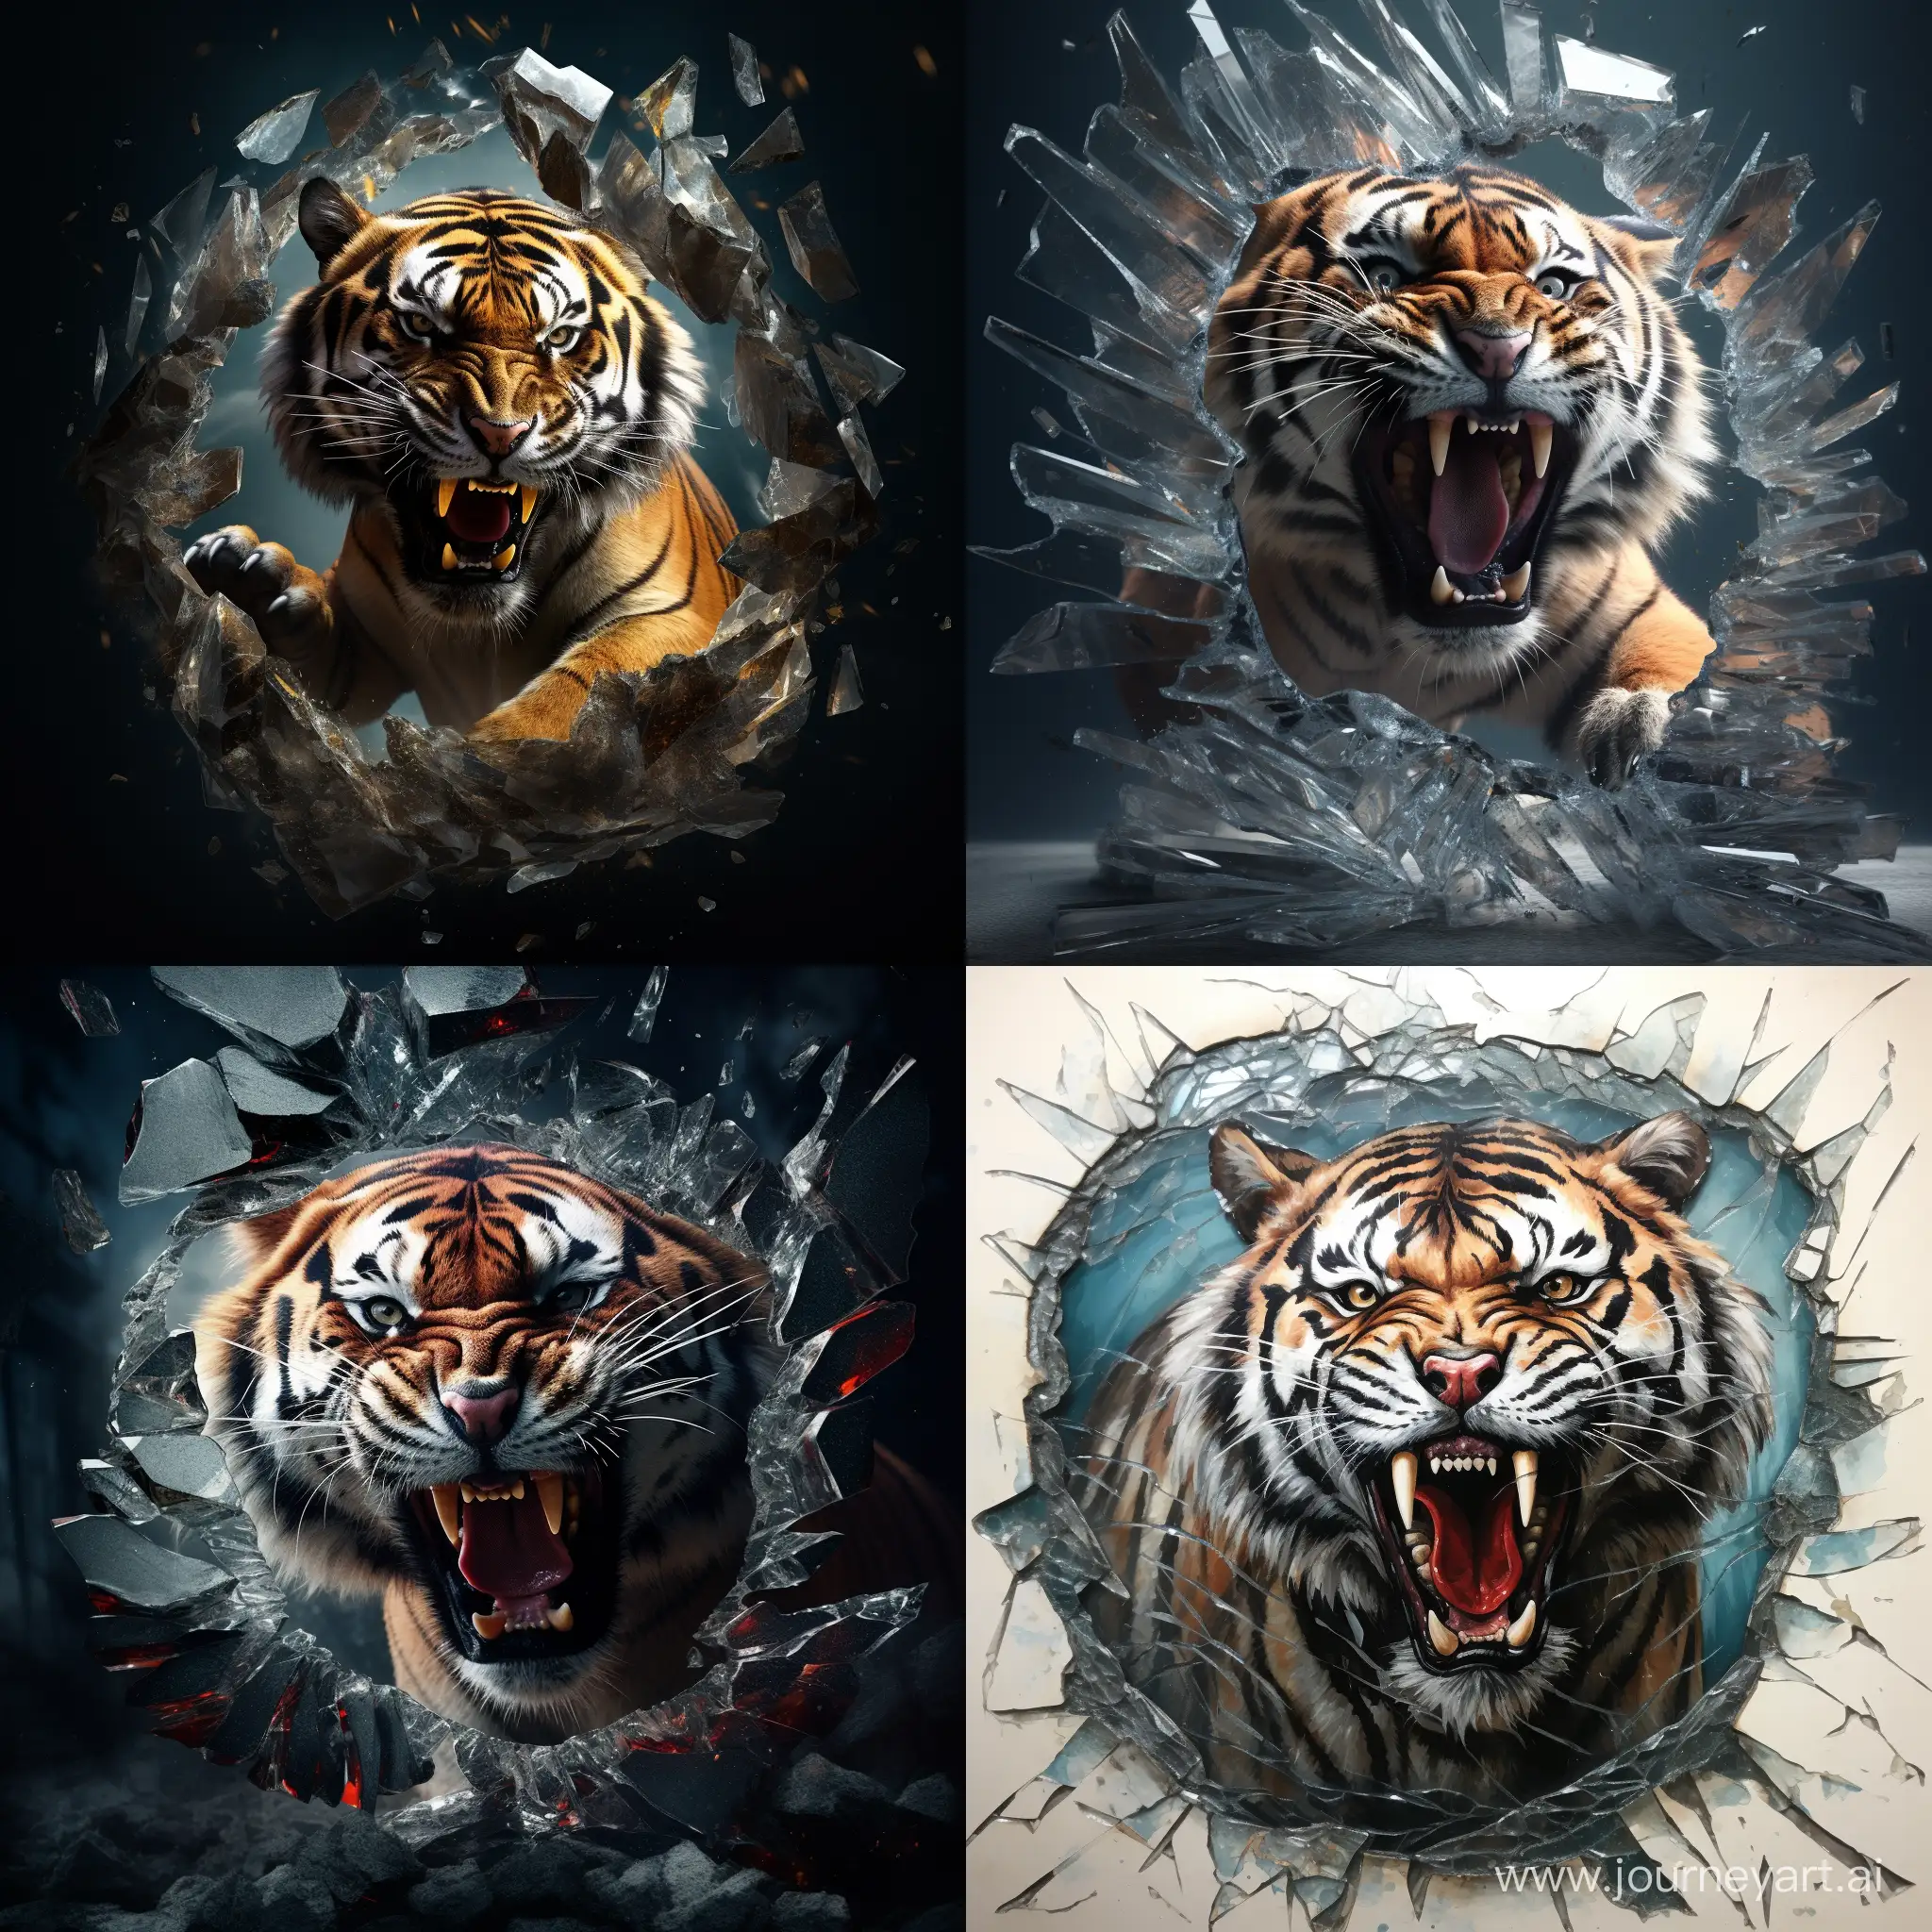 Fierce-Tiger-Leaping-Through-Shattered-Glass